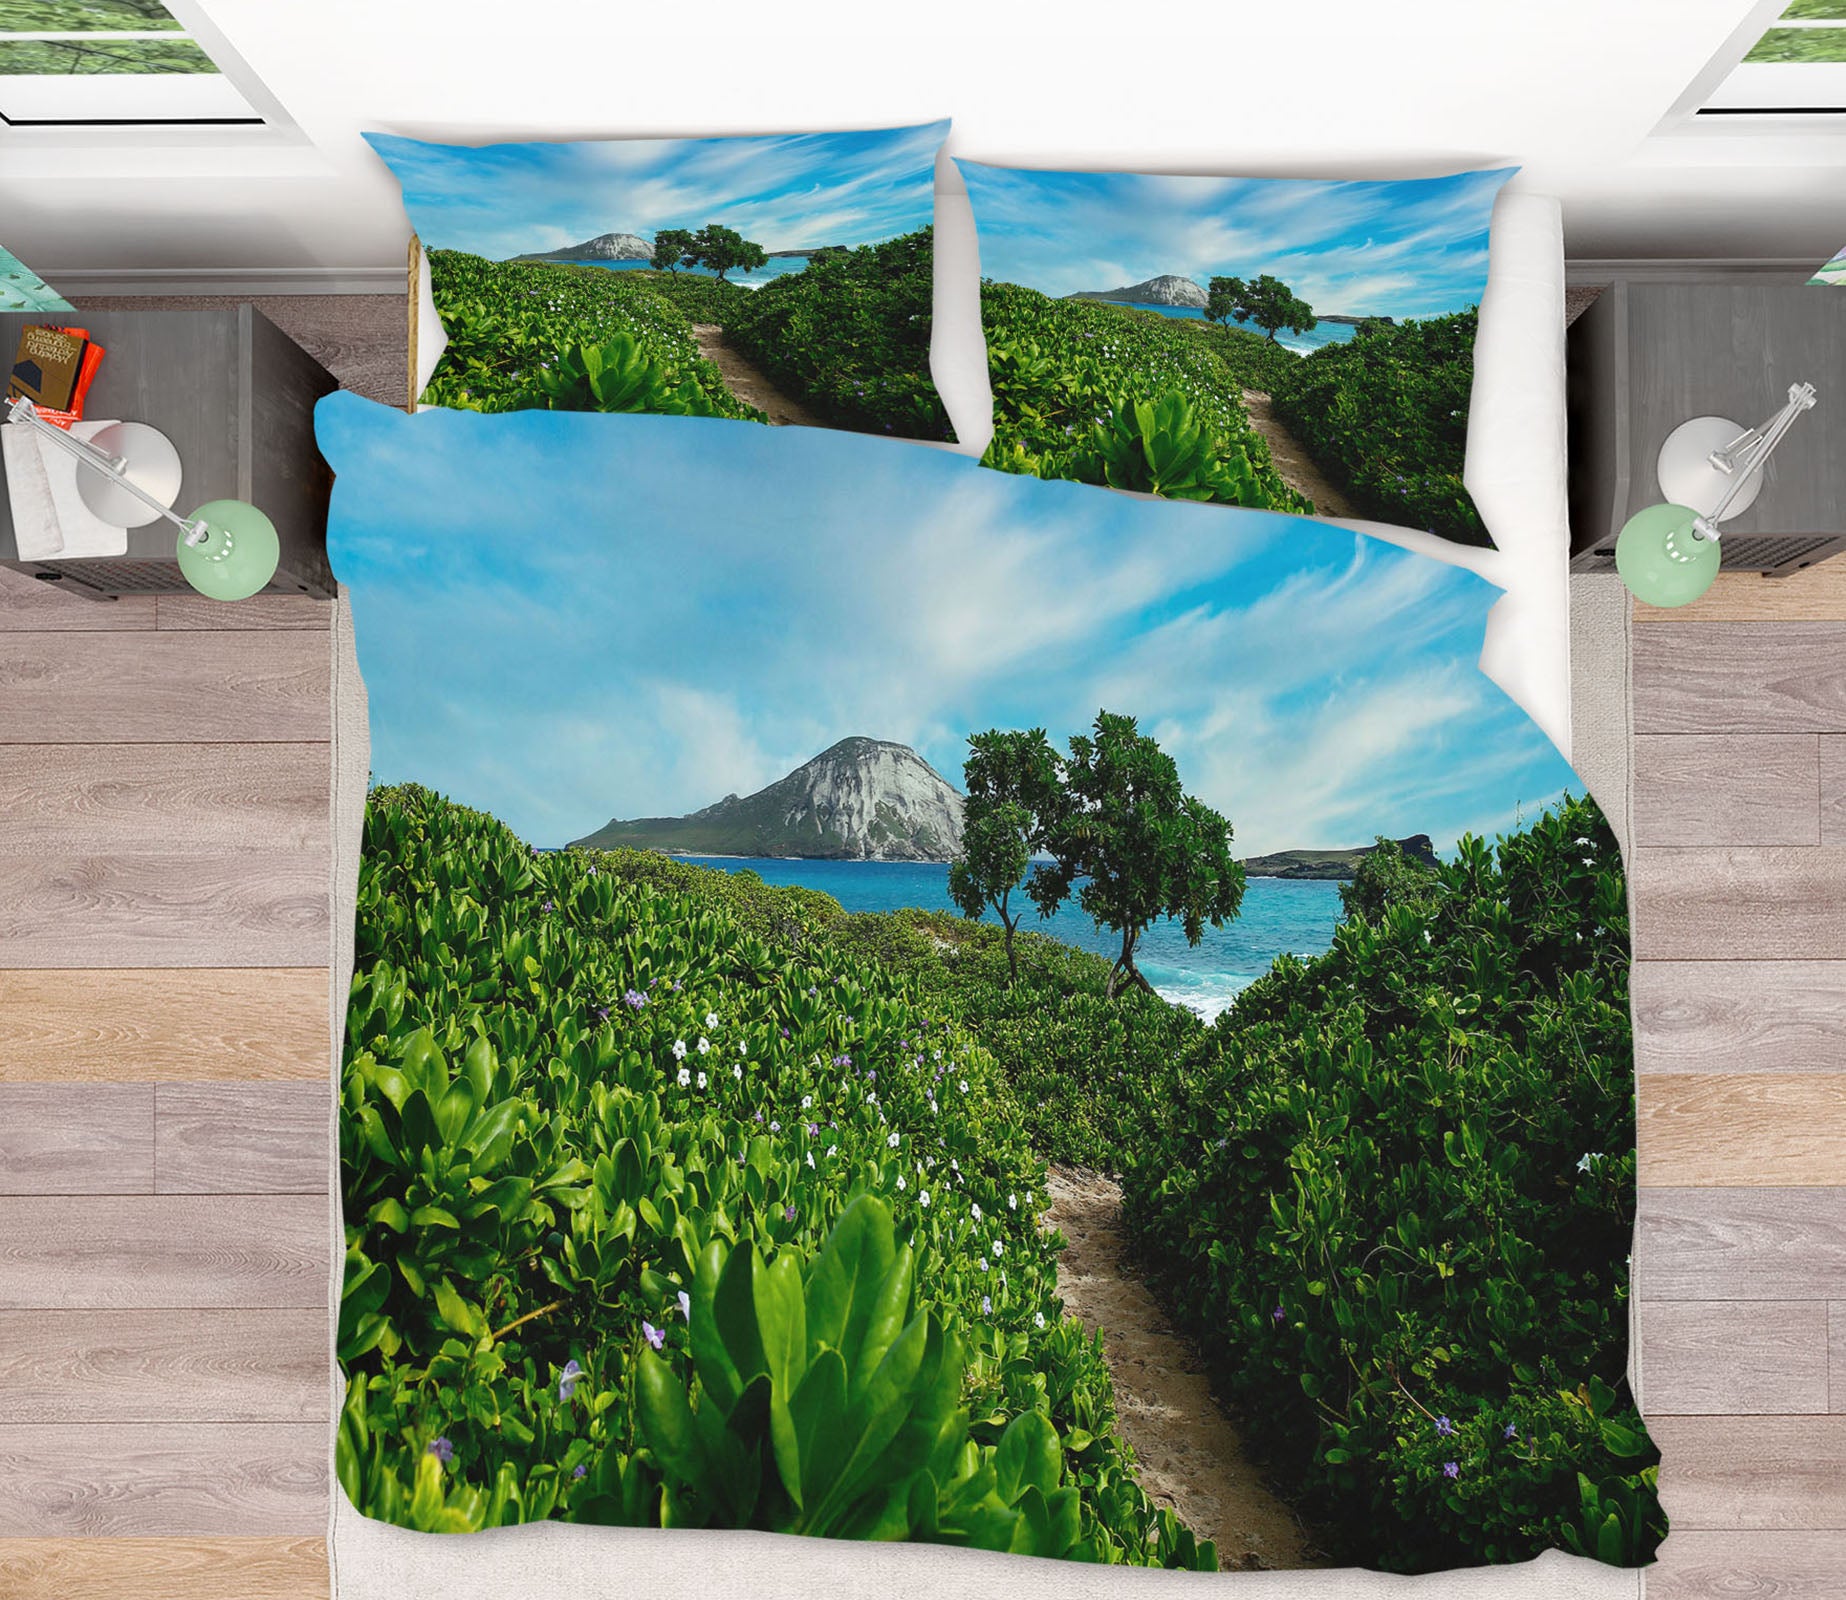 3D Grassy Tree Path 8692 Kathy Barefield Bedding Bed Pillowcases Quilt